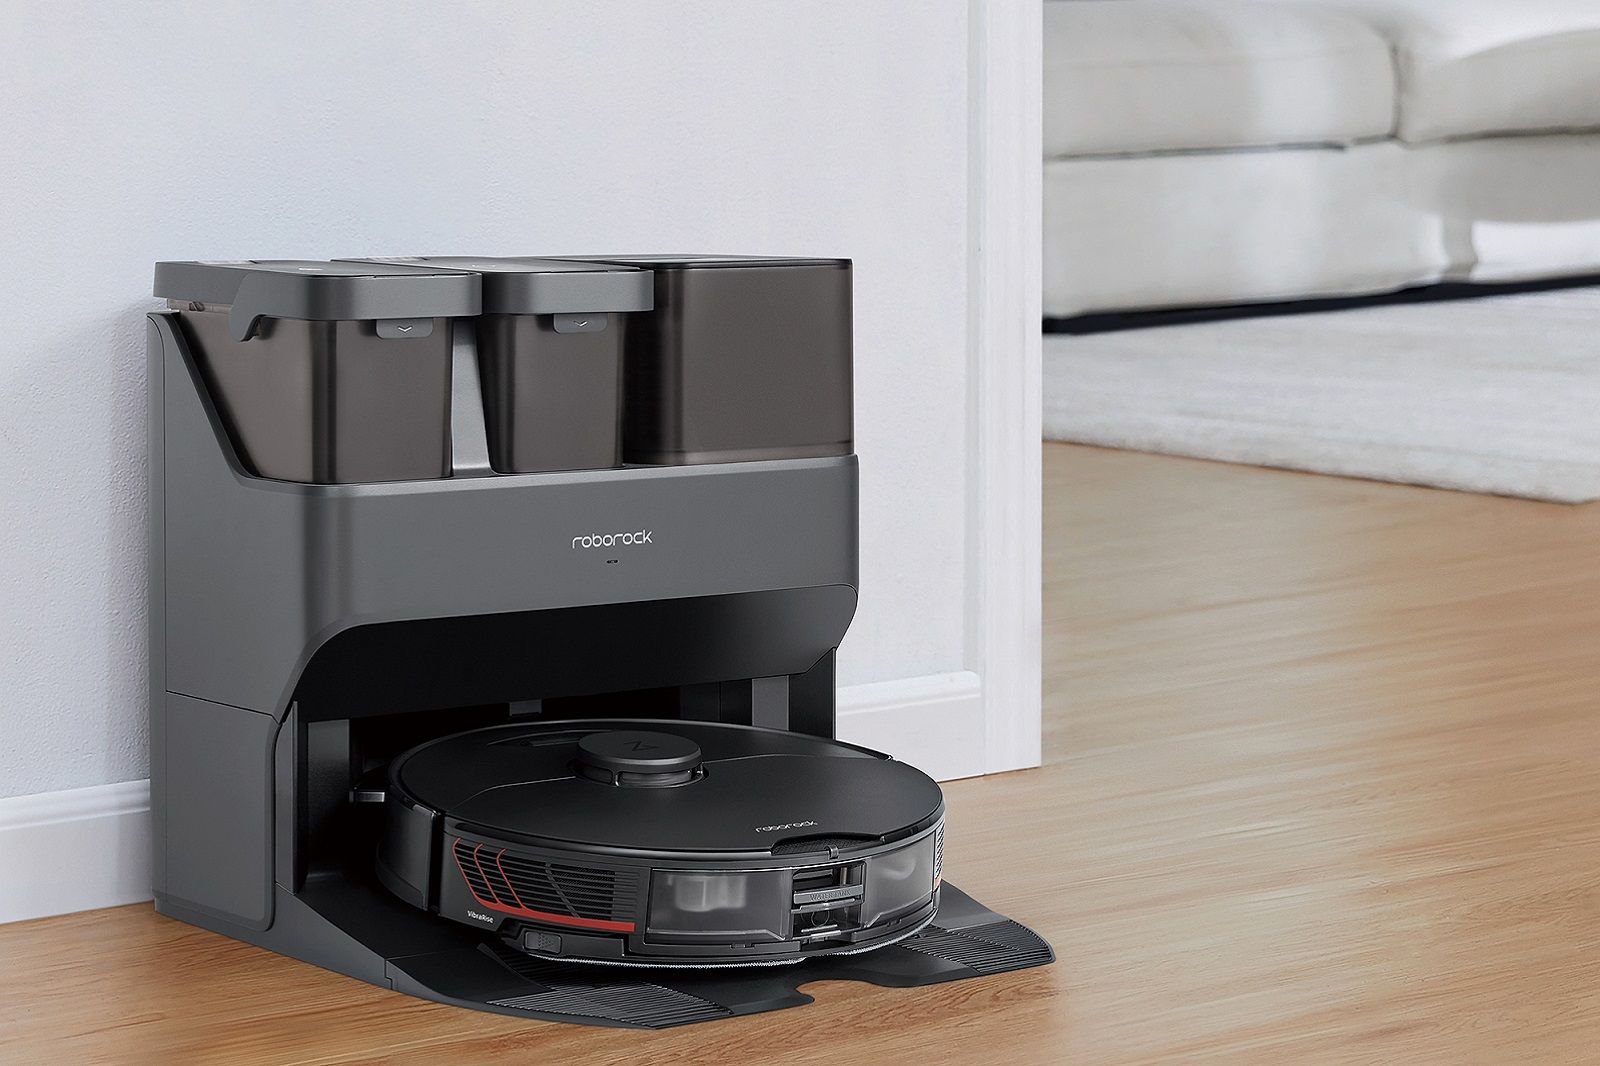 Roborock's latest robot vacuum now comes with a self-emptying and cleaning dock photo 1